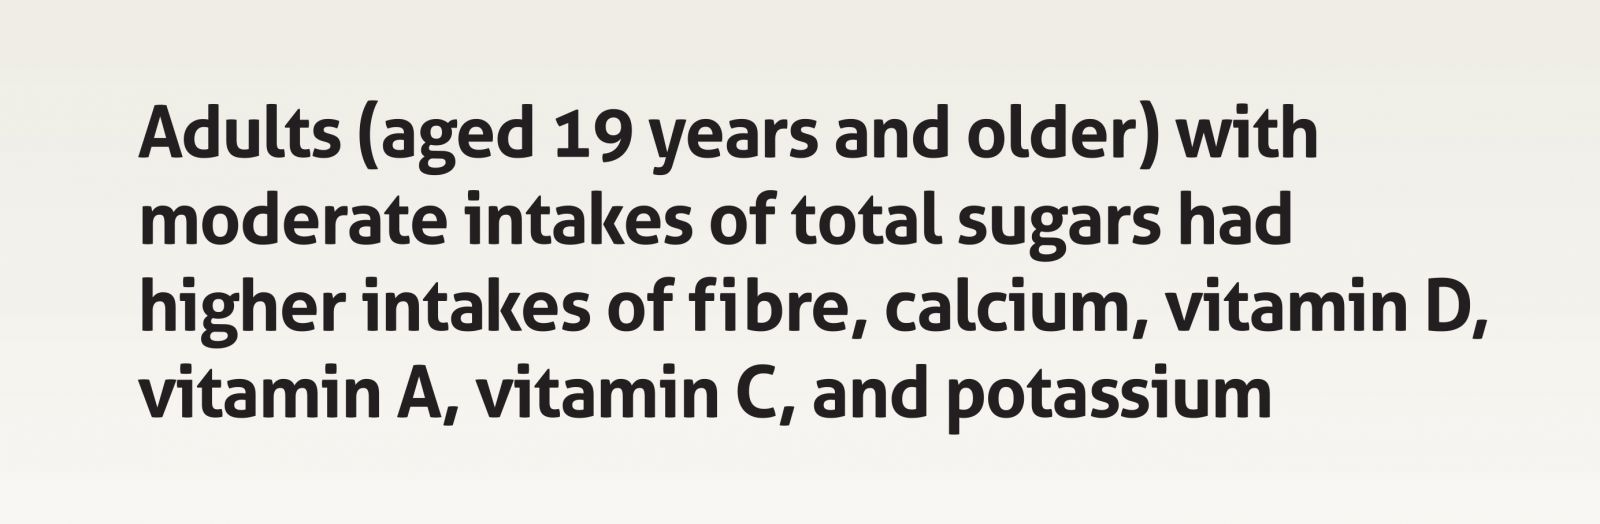 Adults with moderate intakes of total and added sugars had higher intakes of fibre and several vitamins and minerals. 